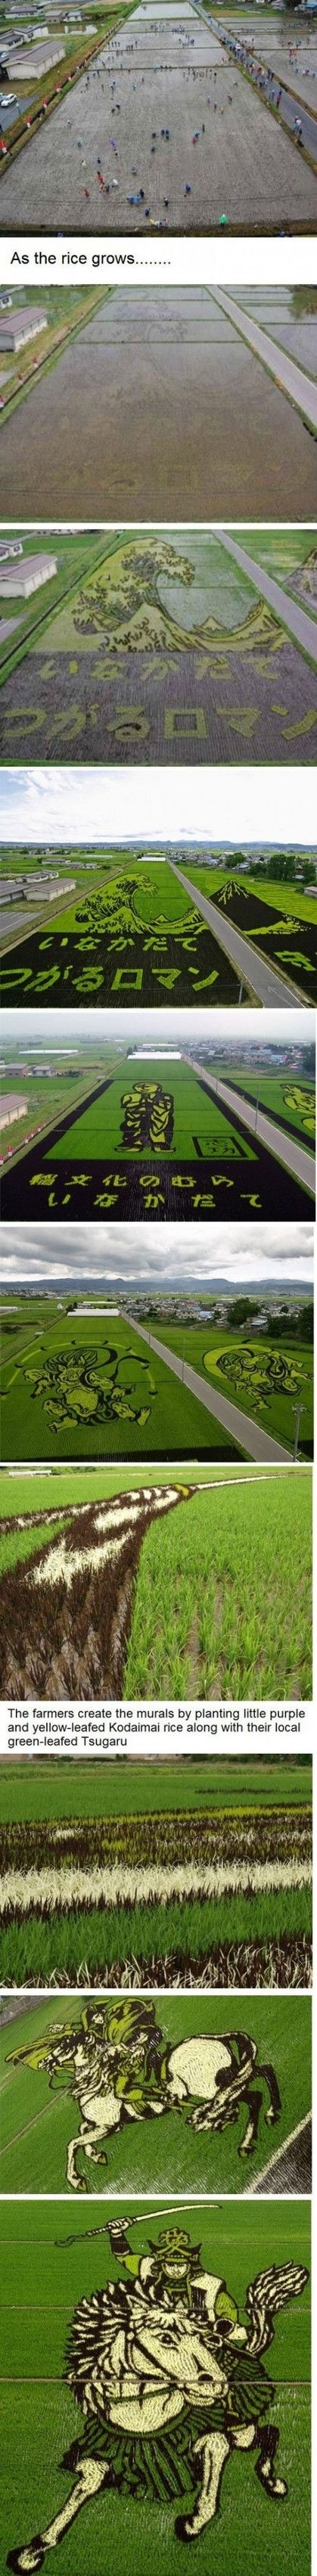 As the rice grows...
 The farmers create the murals by planting little purple and yellow-leafed Kodaimai rice along with their local green-leafed Tsugaru